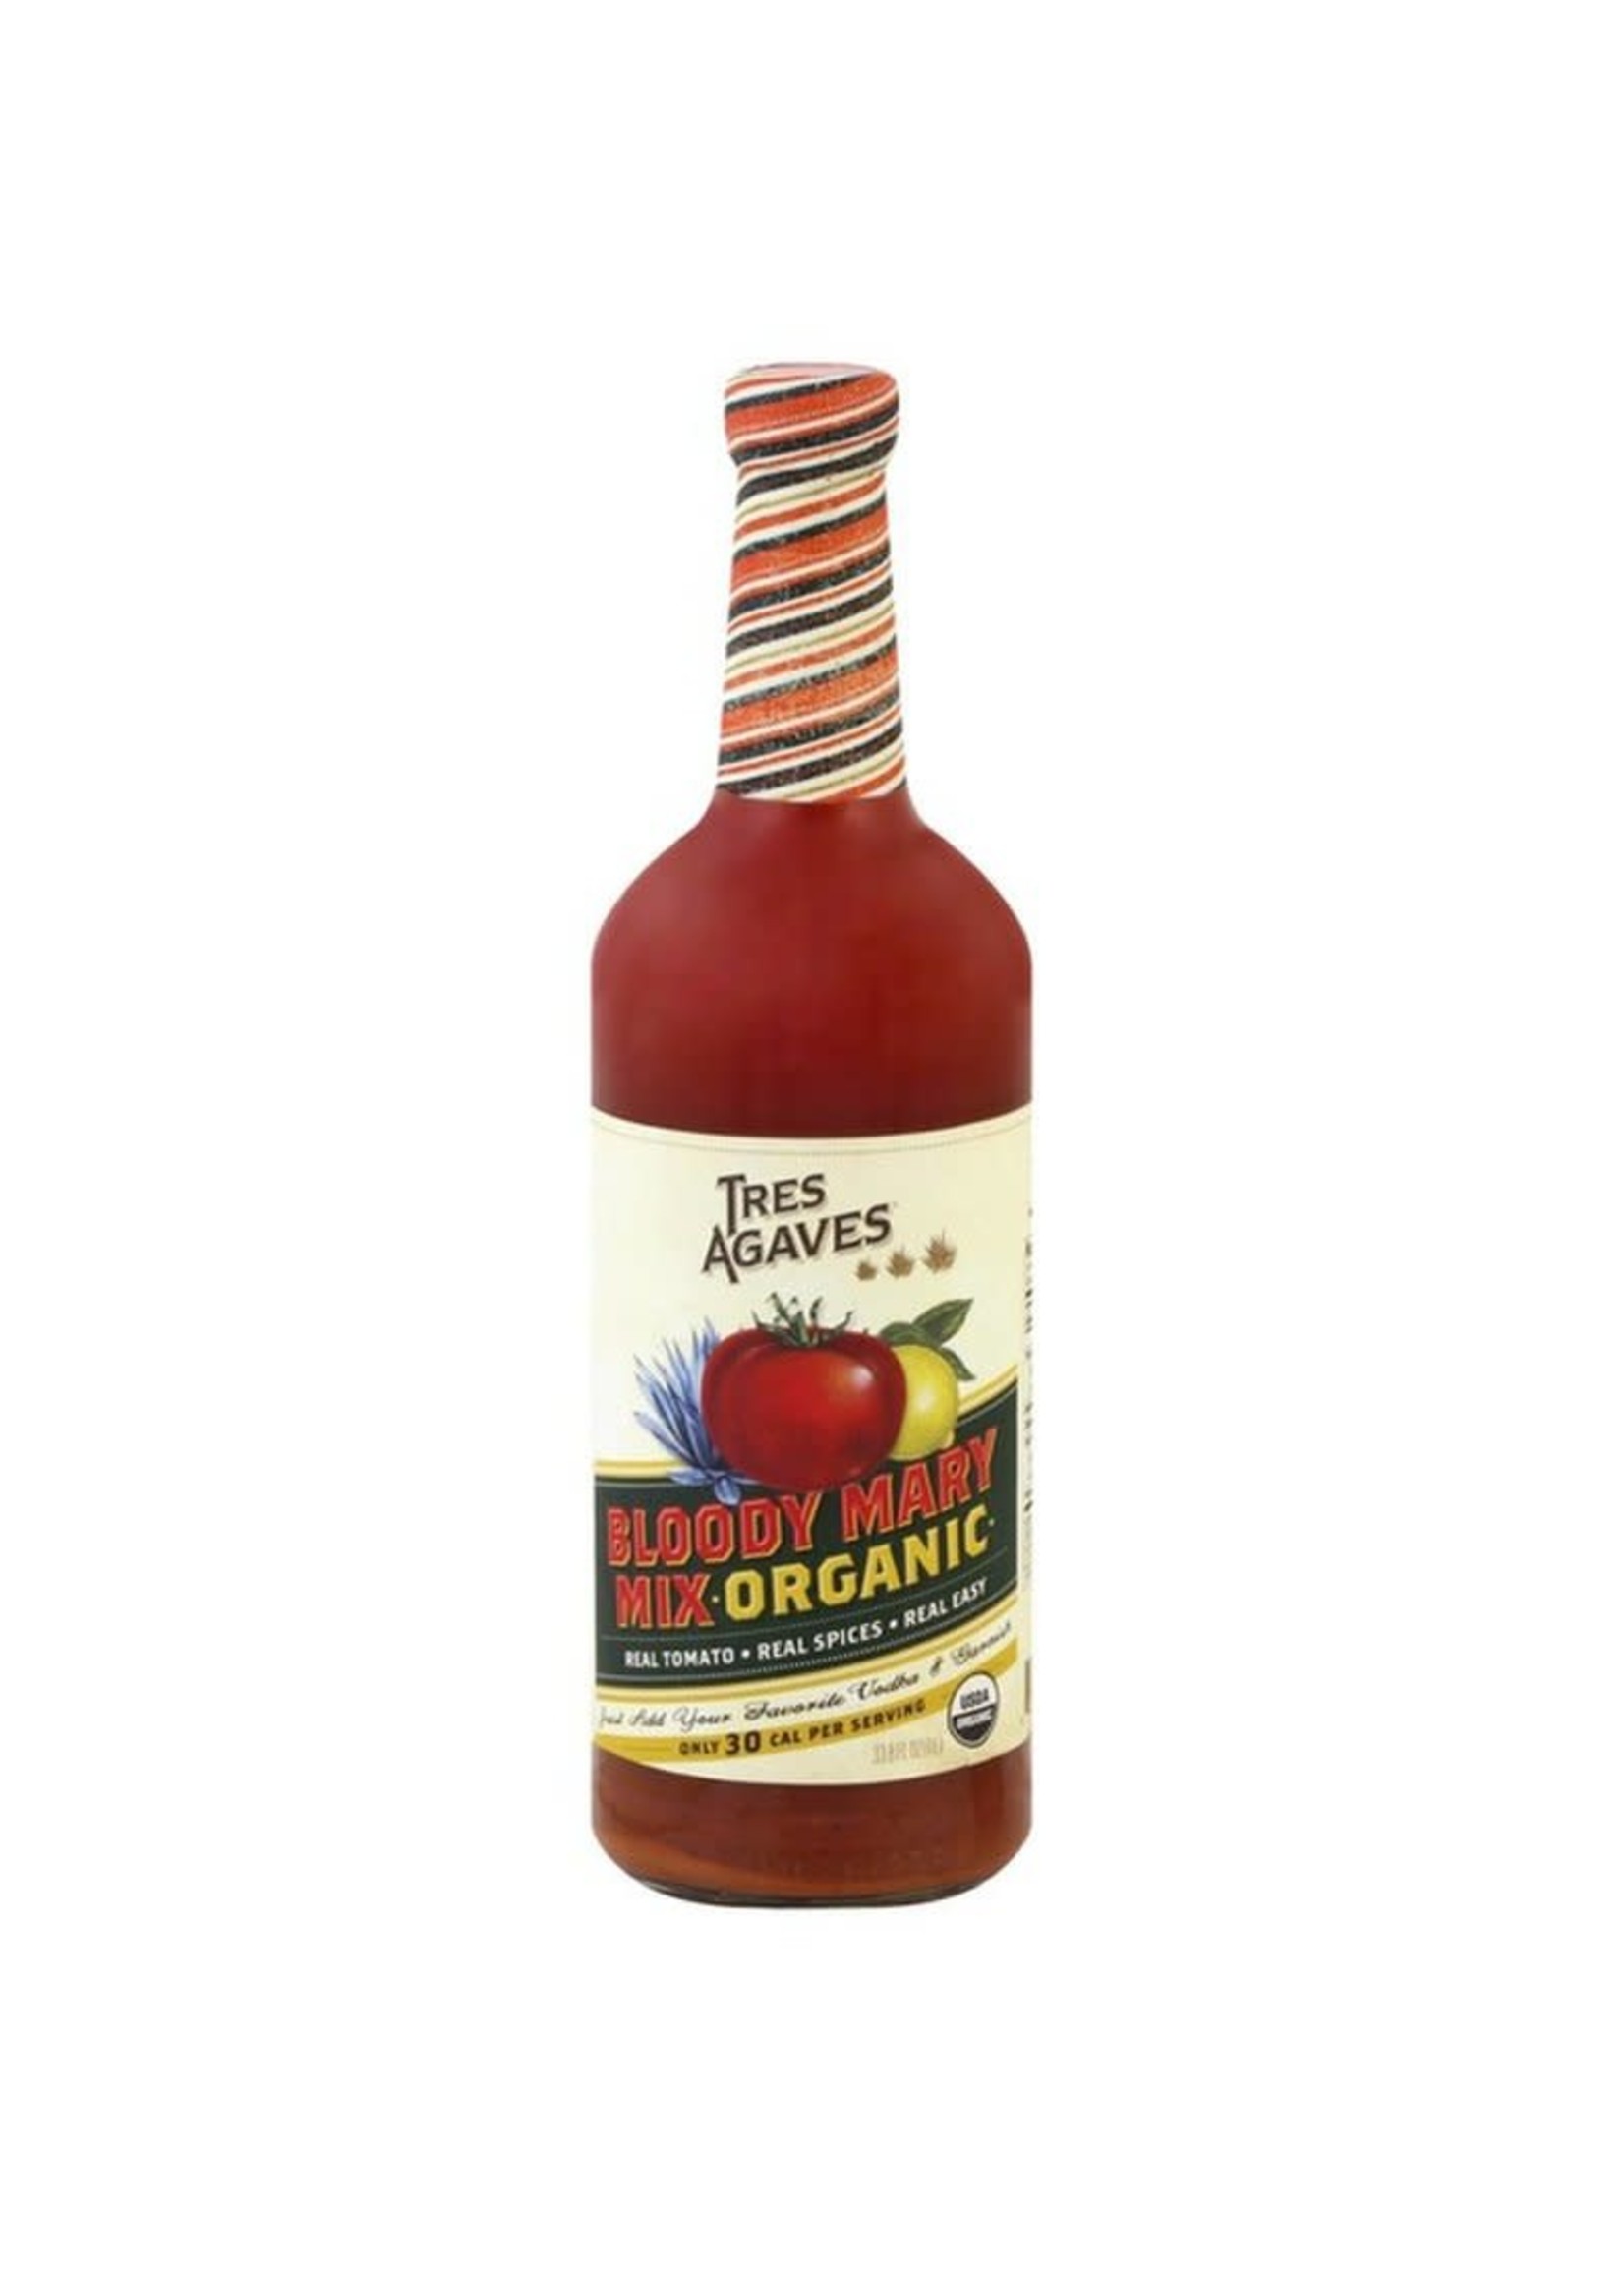 TRES AGAVES TRES AGAVES	BLOODY MARY MIX	1.0L